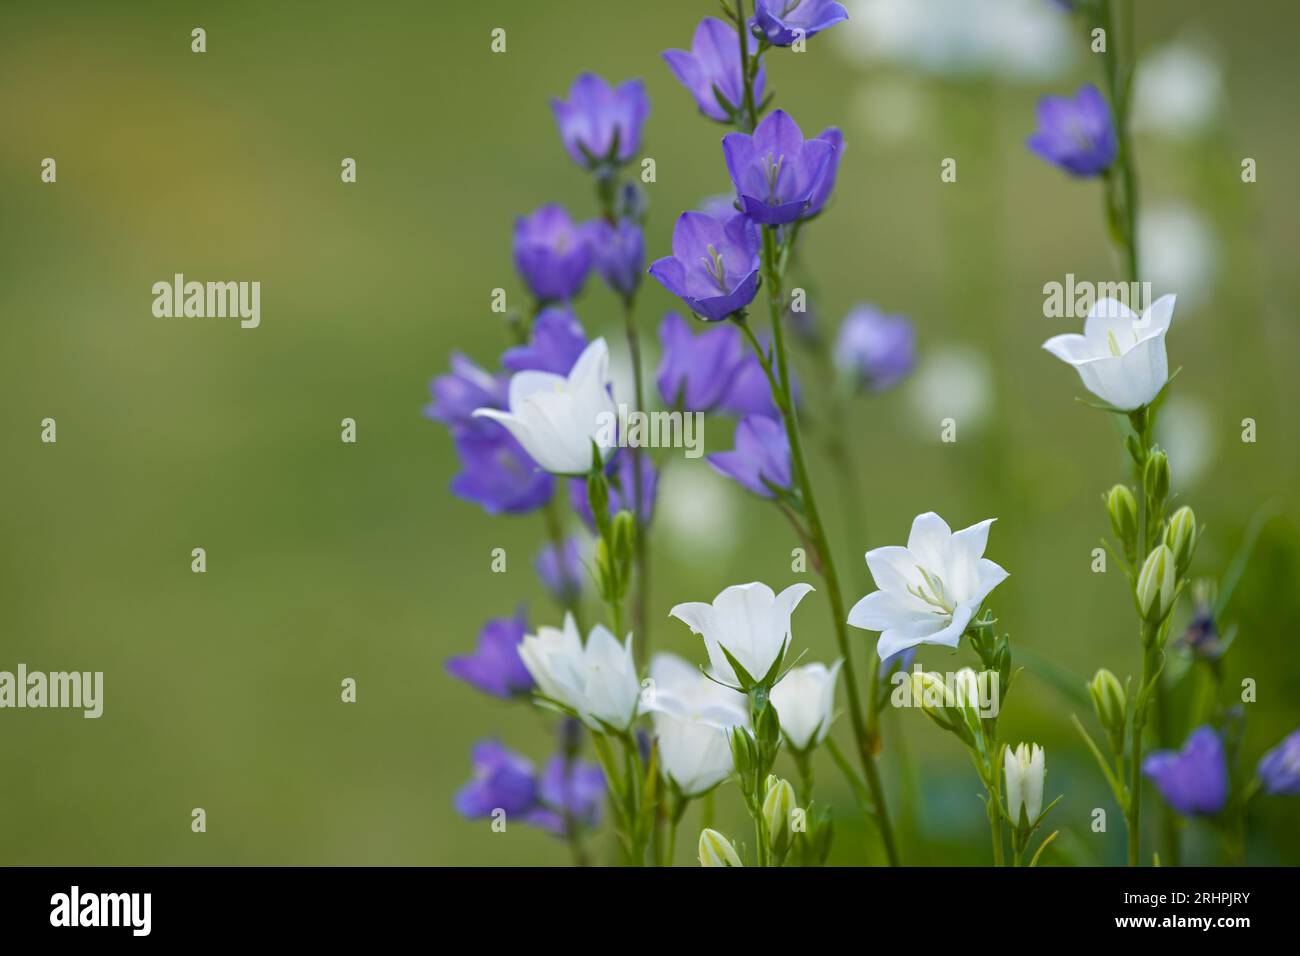 white and purple flowers of peach-leaved bellflower (Campanula persicifolia), Germany Stock Photo